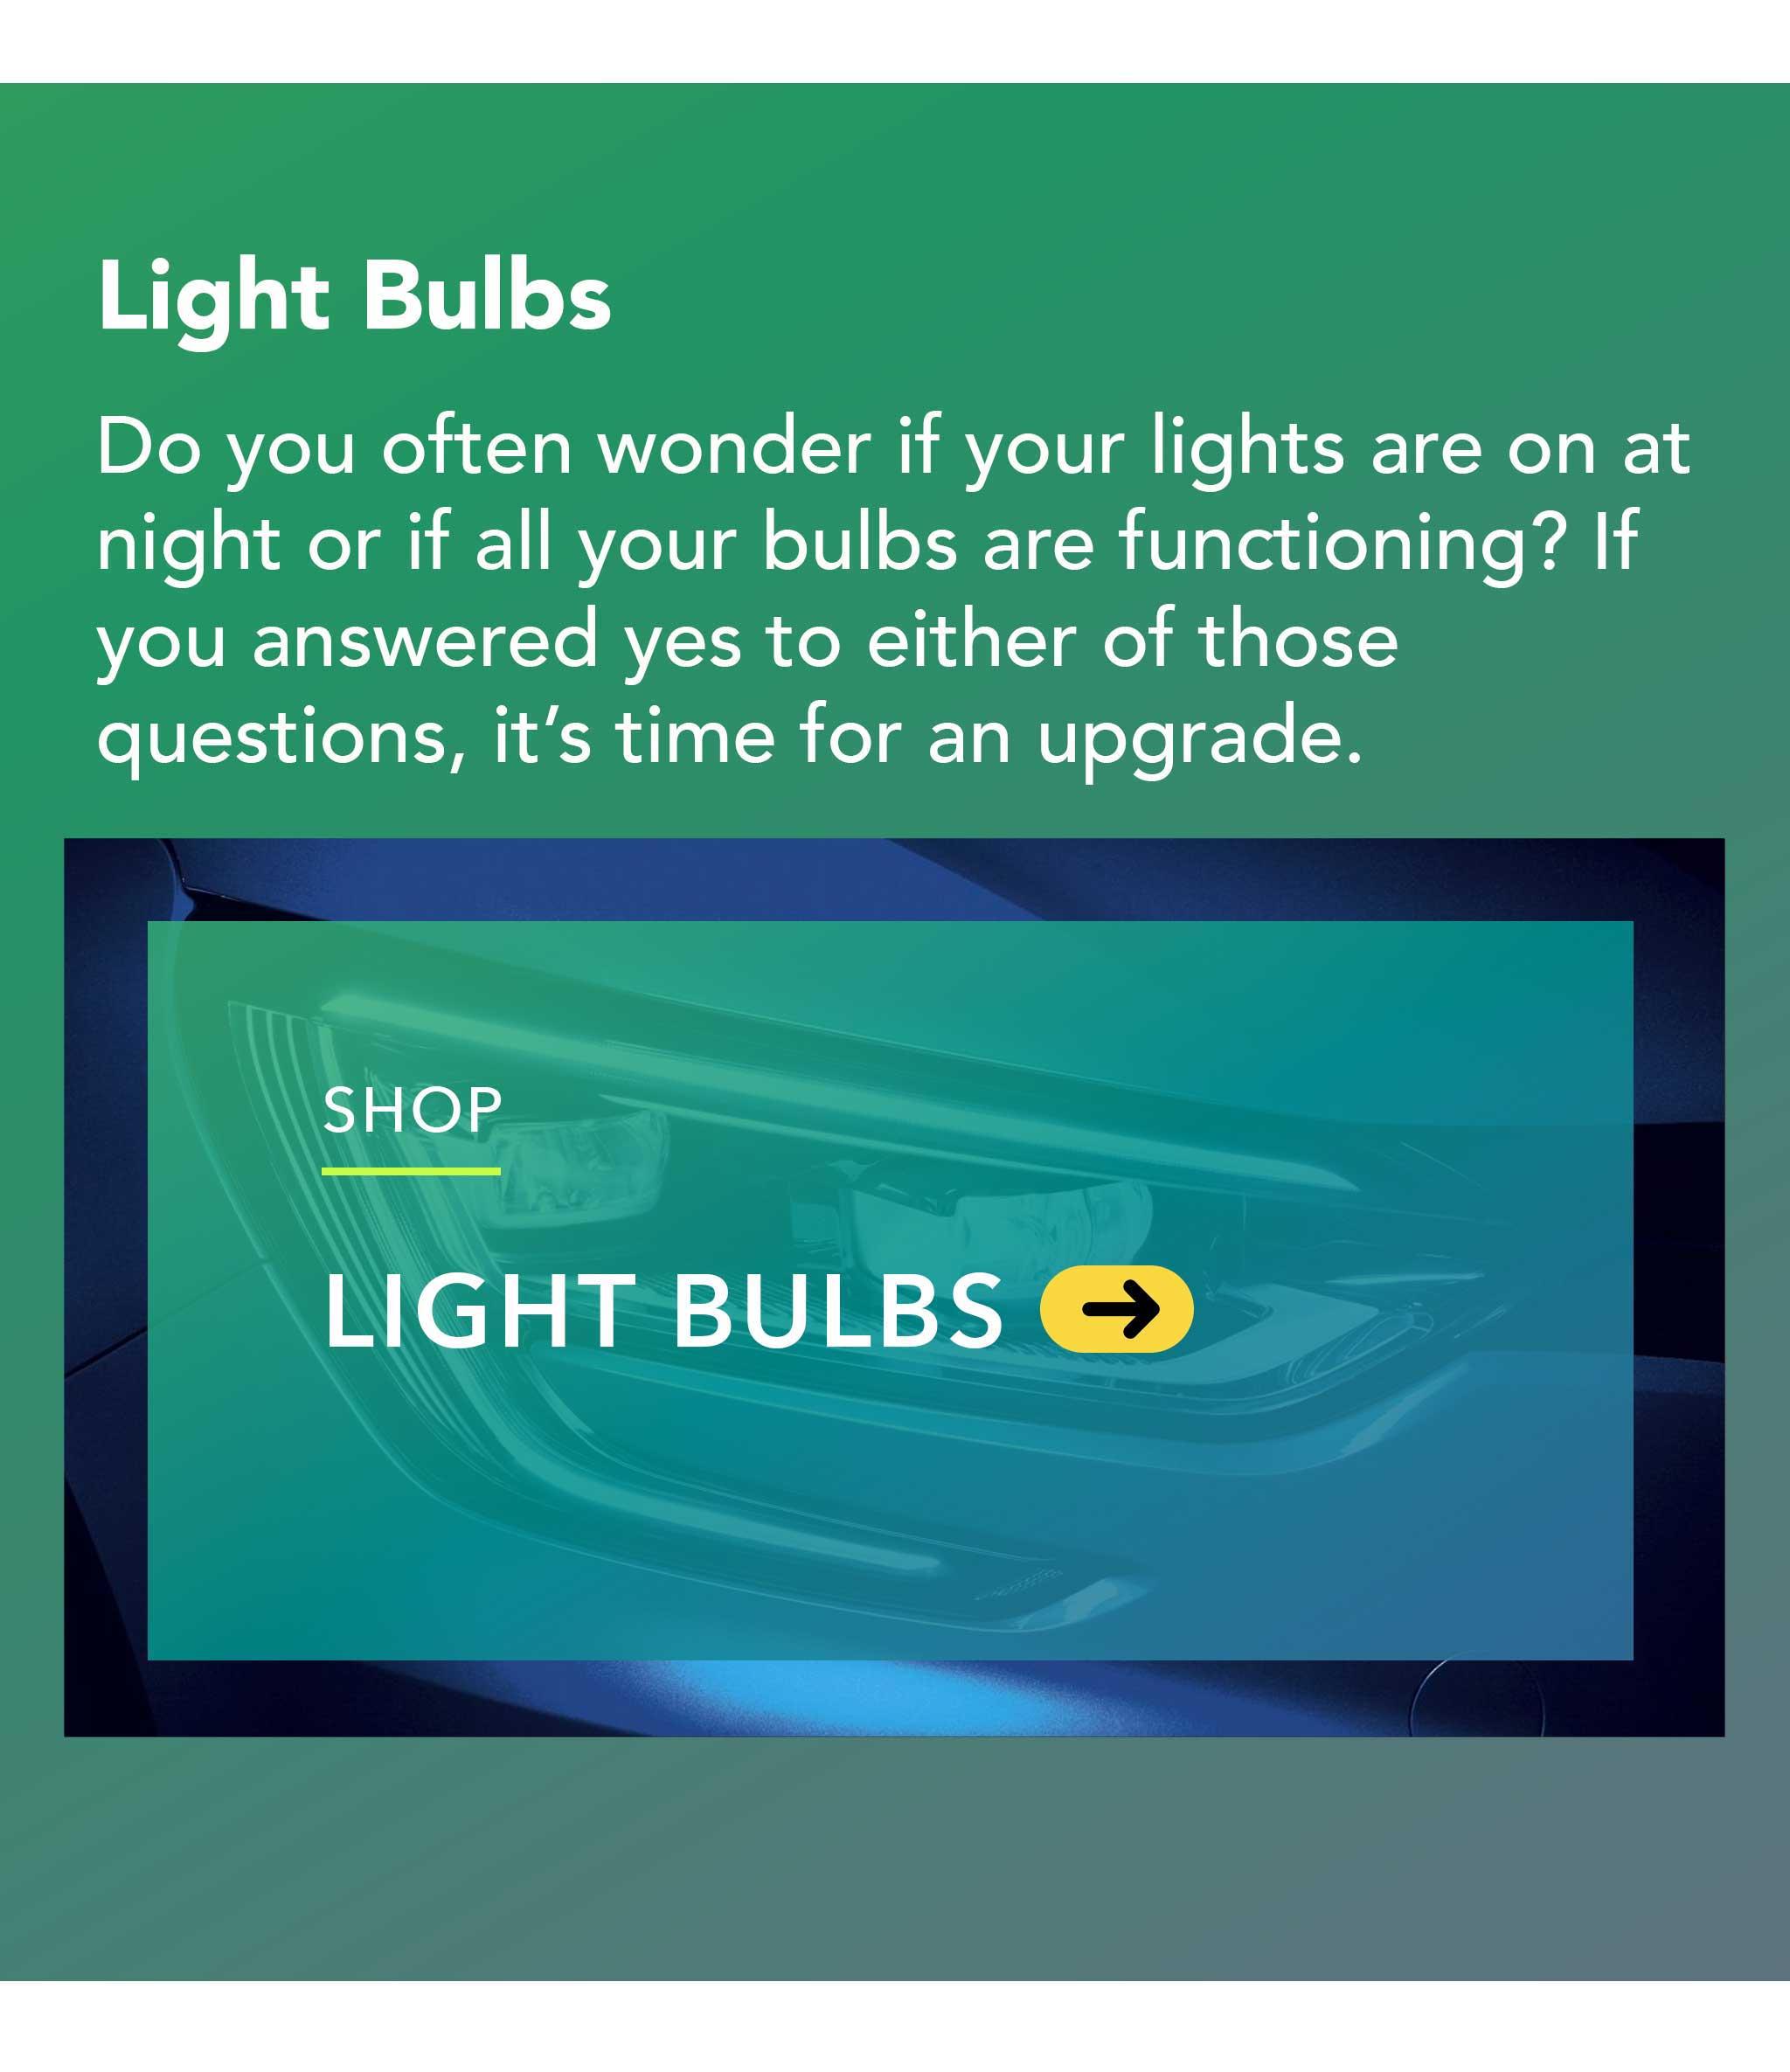 Do you often wonder if your lights are on at night or if all your bulbs are functioning? If you answered yes to either of those questions, it’s time for an upgrade.